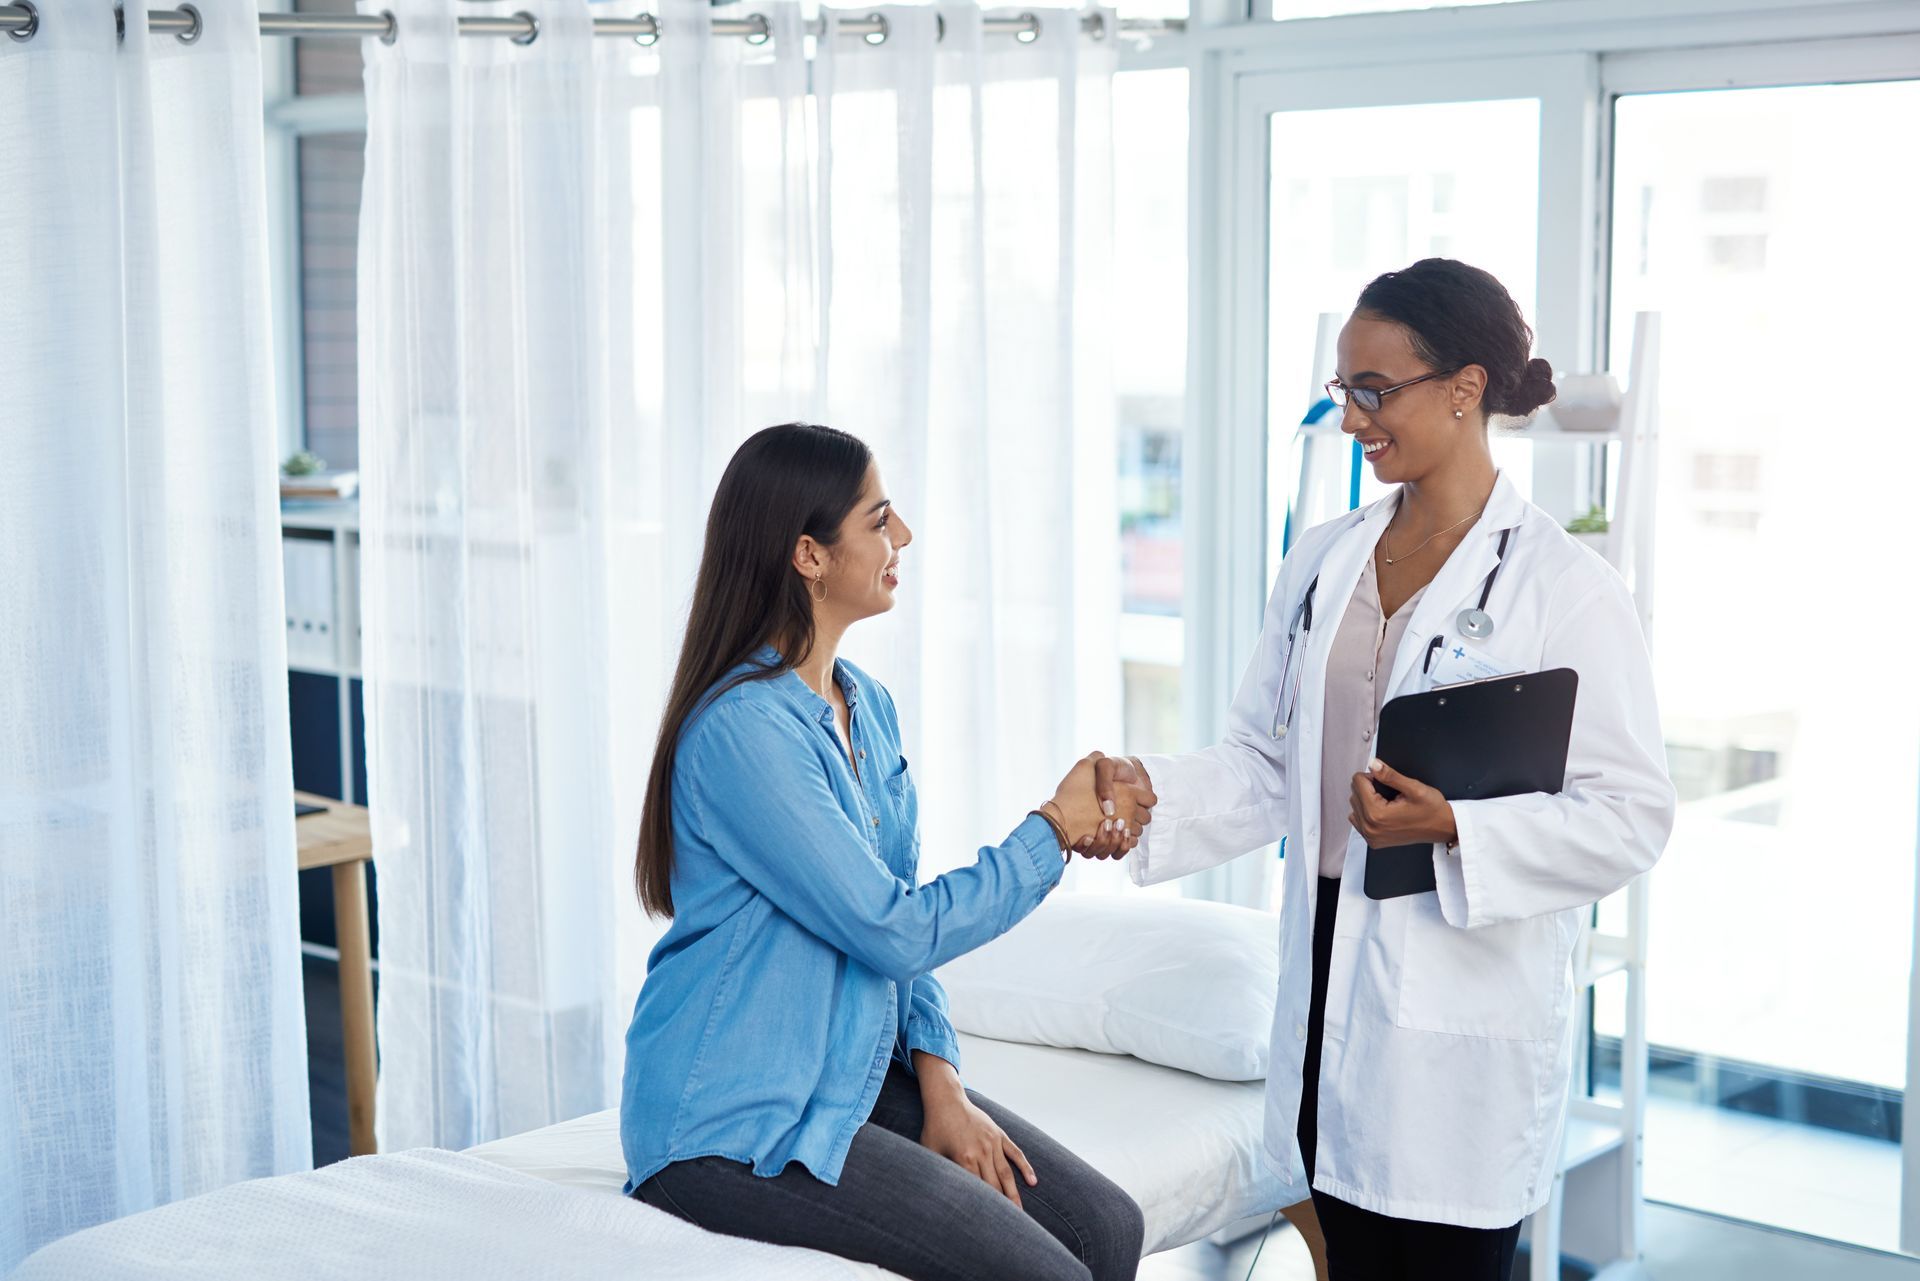 A pregnant woman is sitting on a bed shaking hands with a doctor.